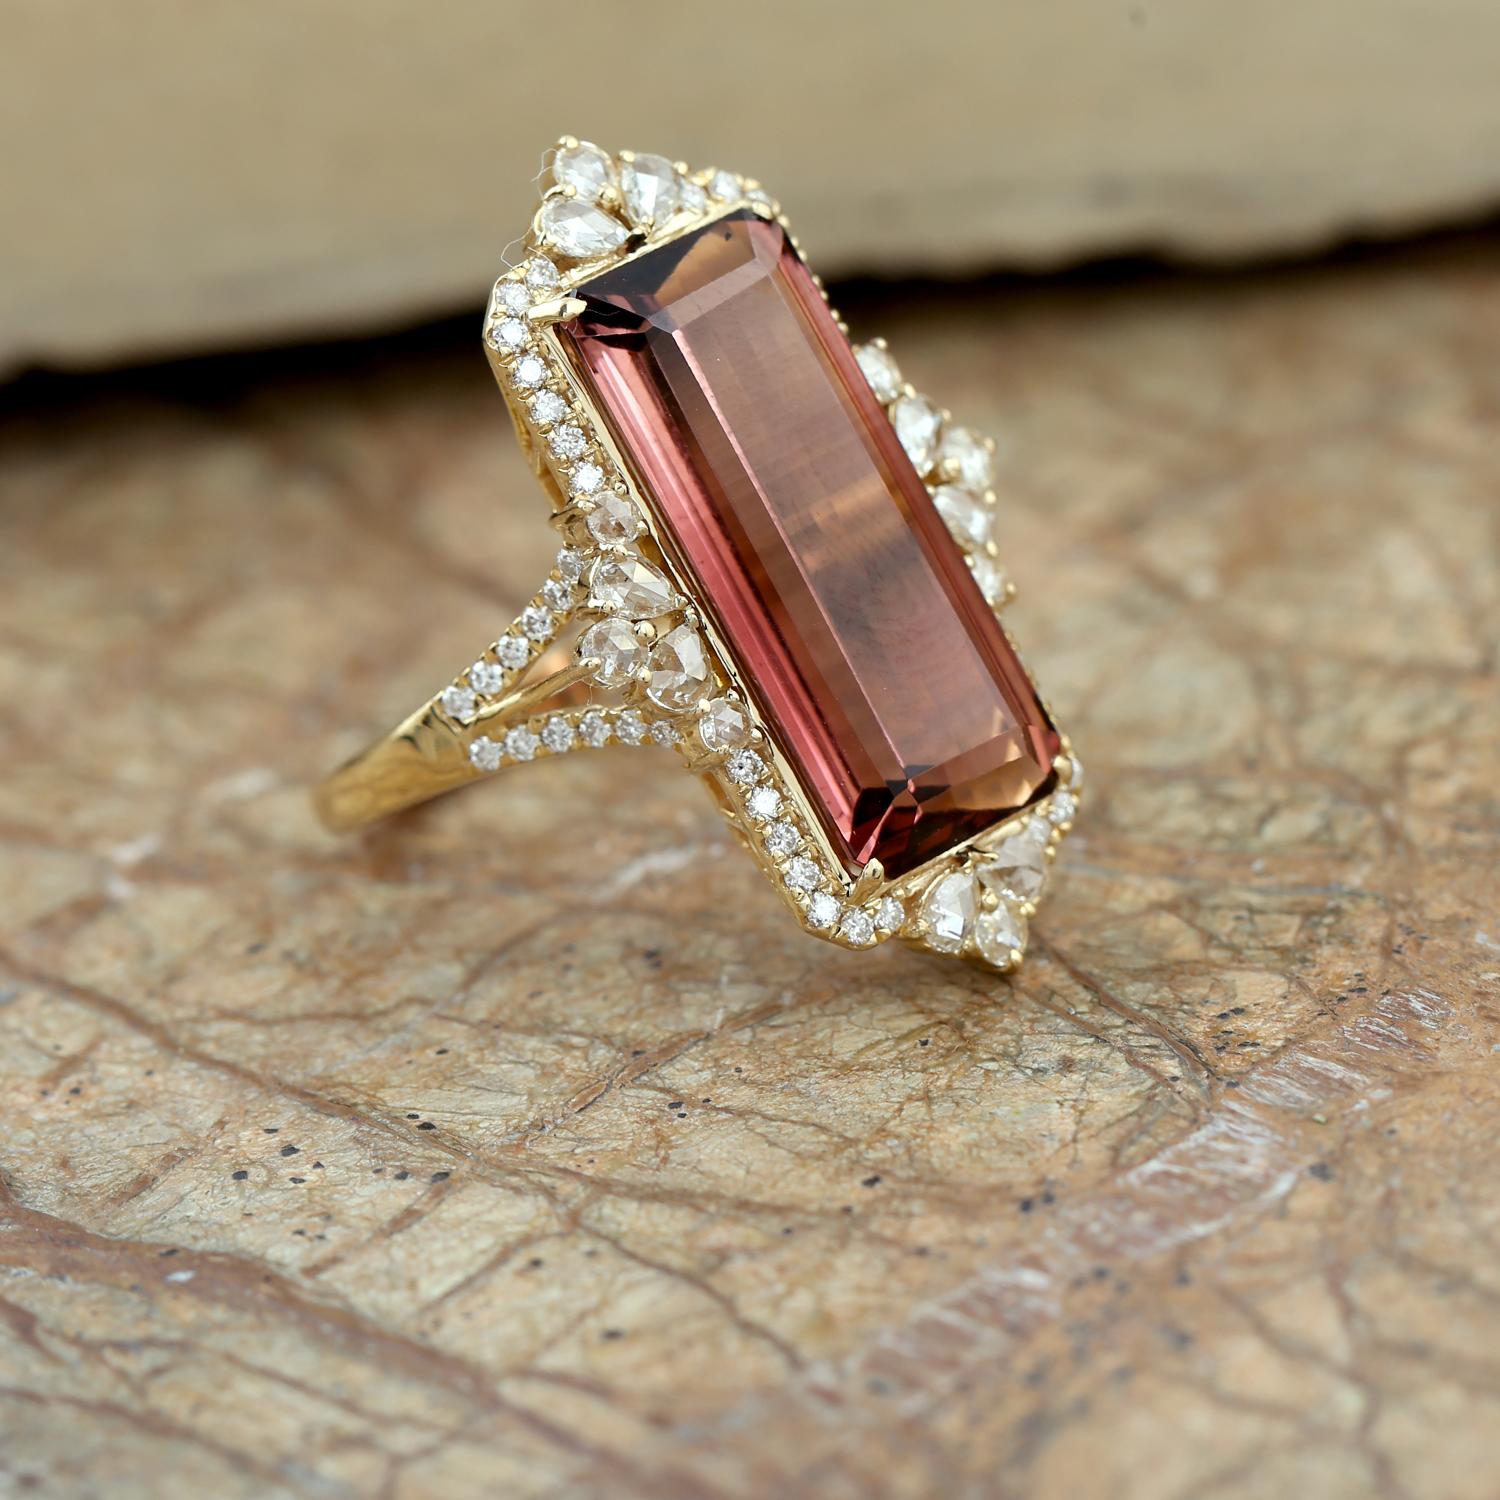 Art Deco Pink Tourmaline Cocktail Ring Wth Diamonds Made in 18k Yellow Gold For Sale